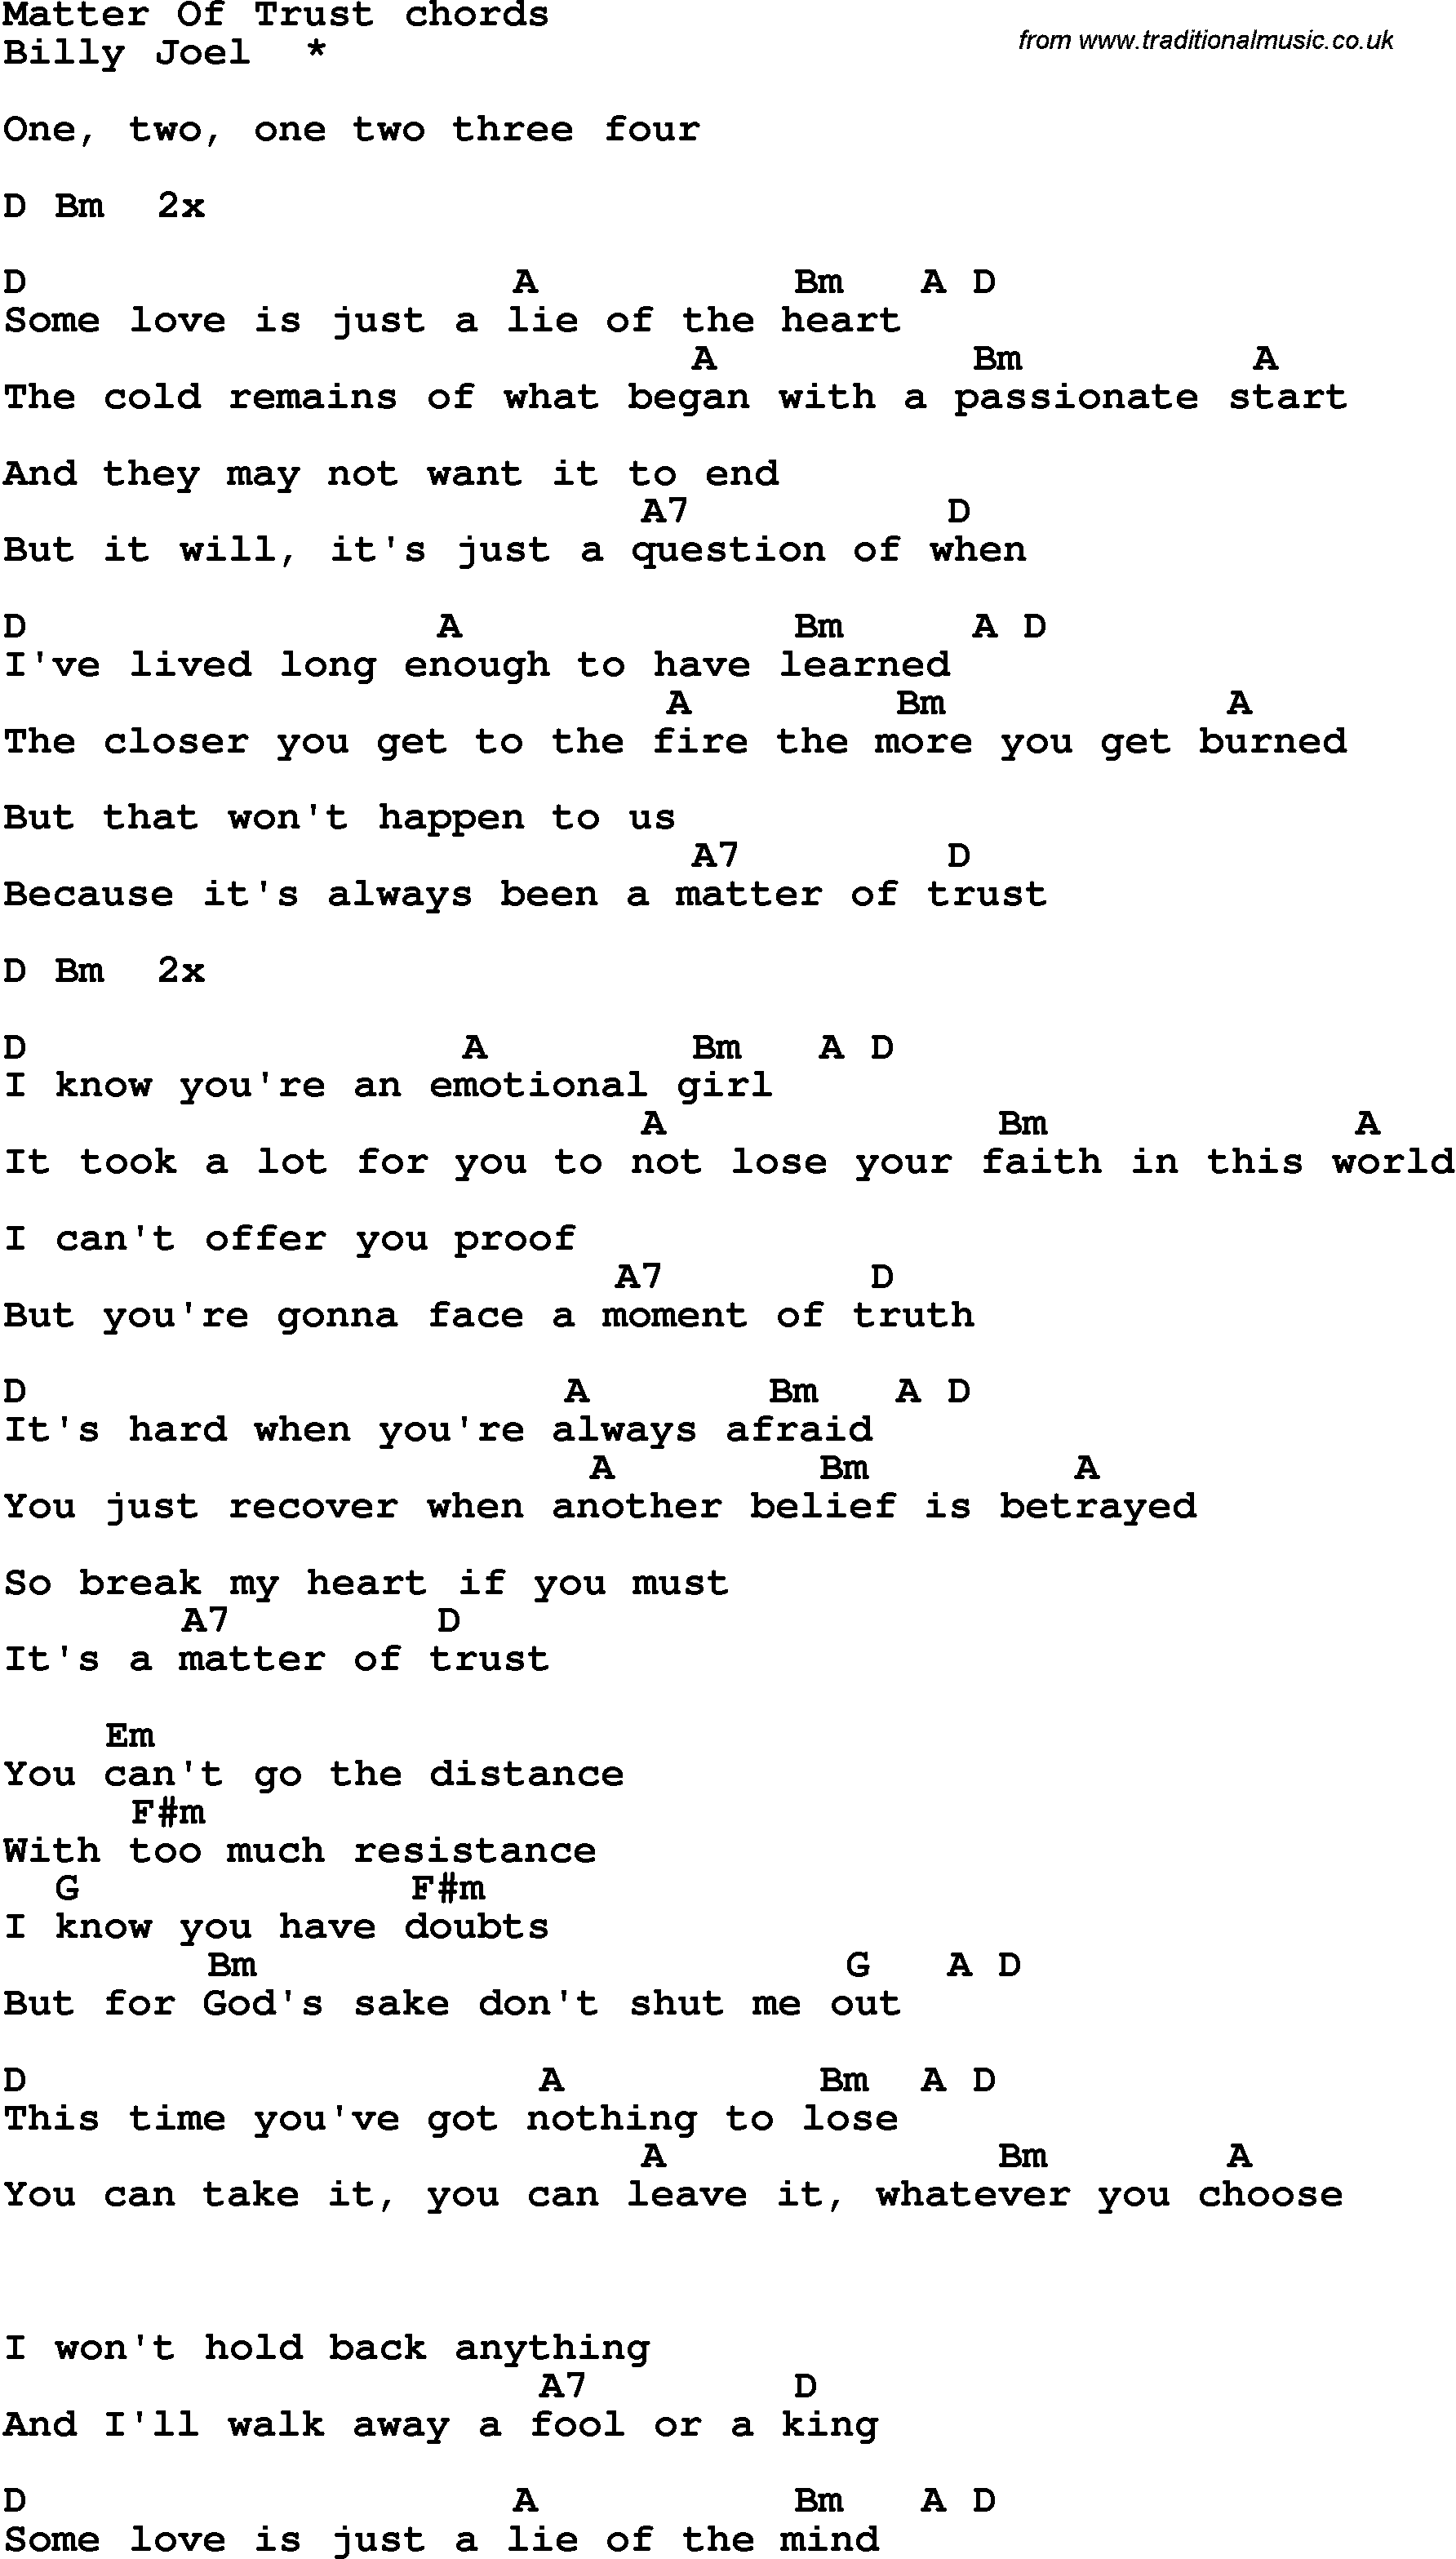 Song Lyrics with guitar chords for Matter Of Trust